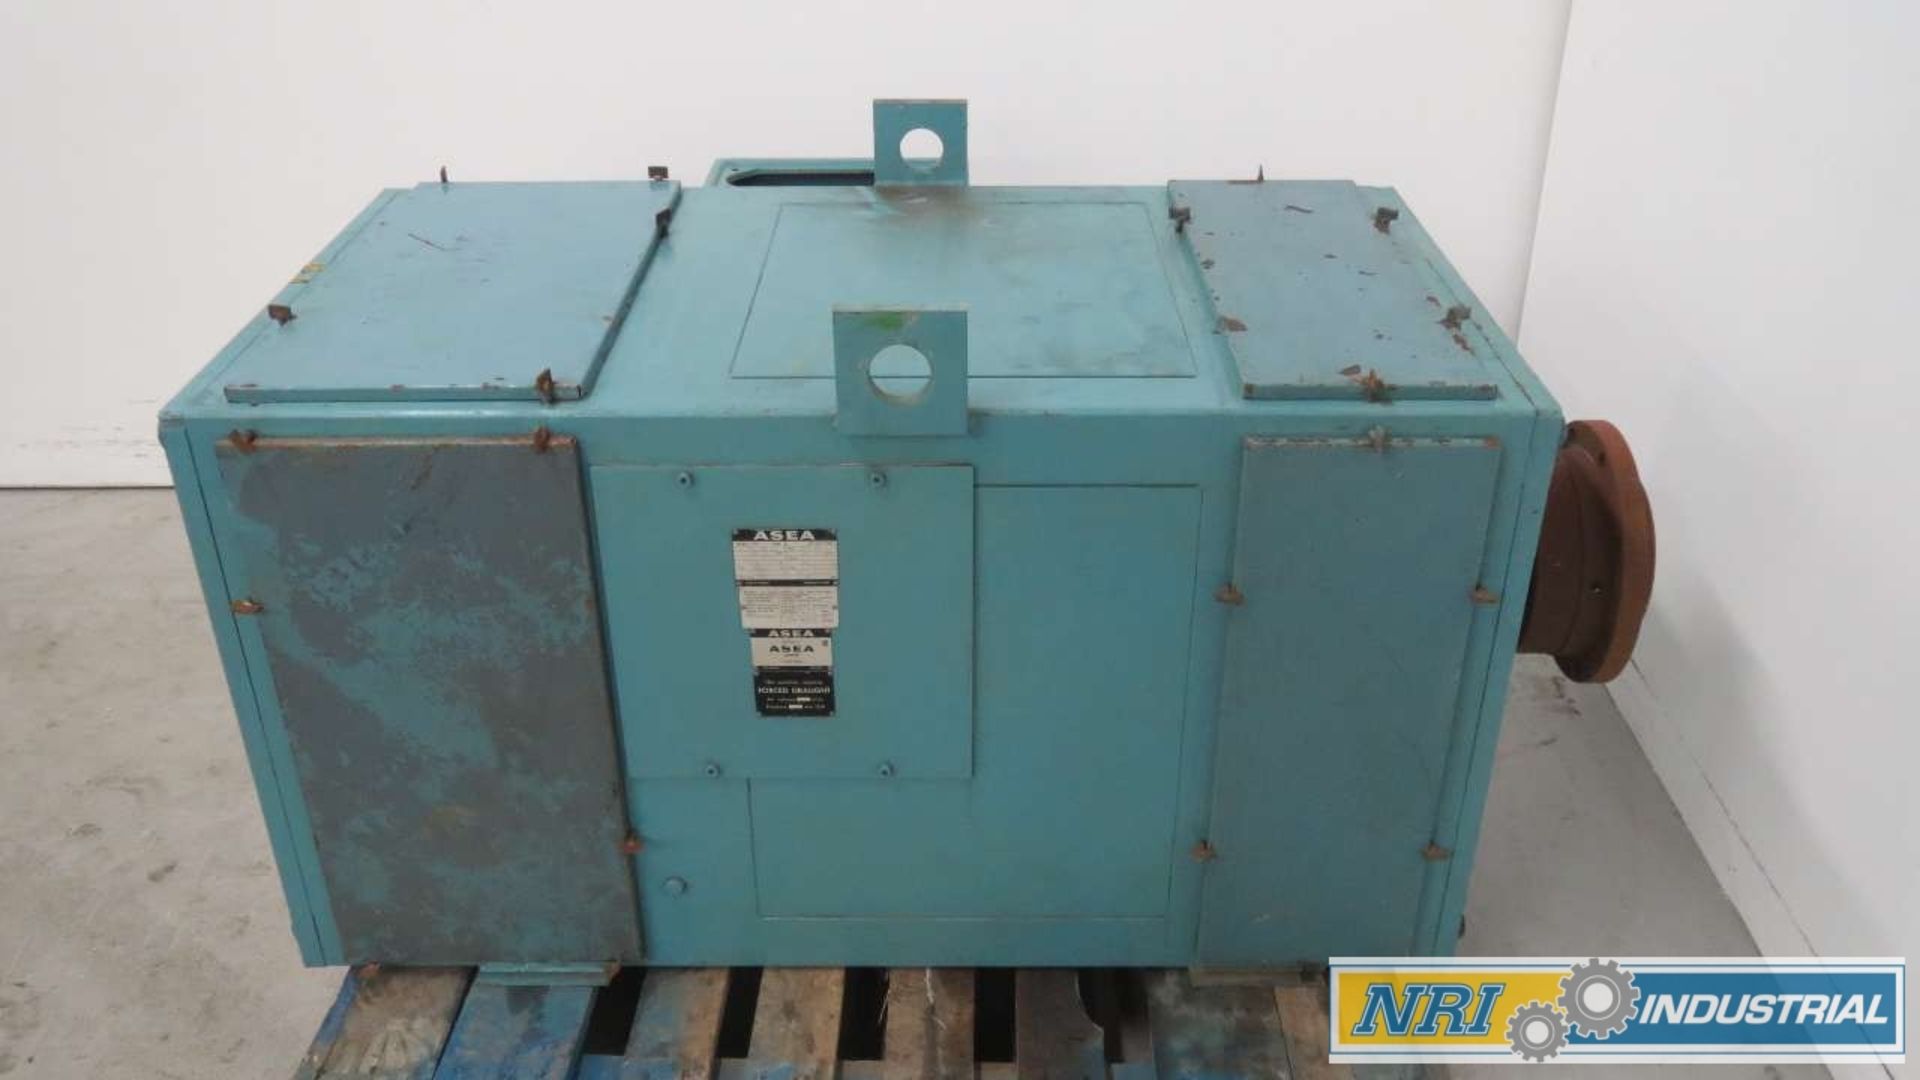 ASEA LAB 355 LC FORCED DRAUGHT 295KW 535V-DC 880RPM DC ELECTRIC MOTOR